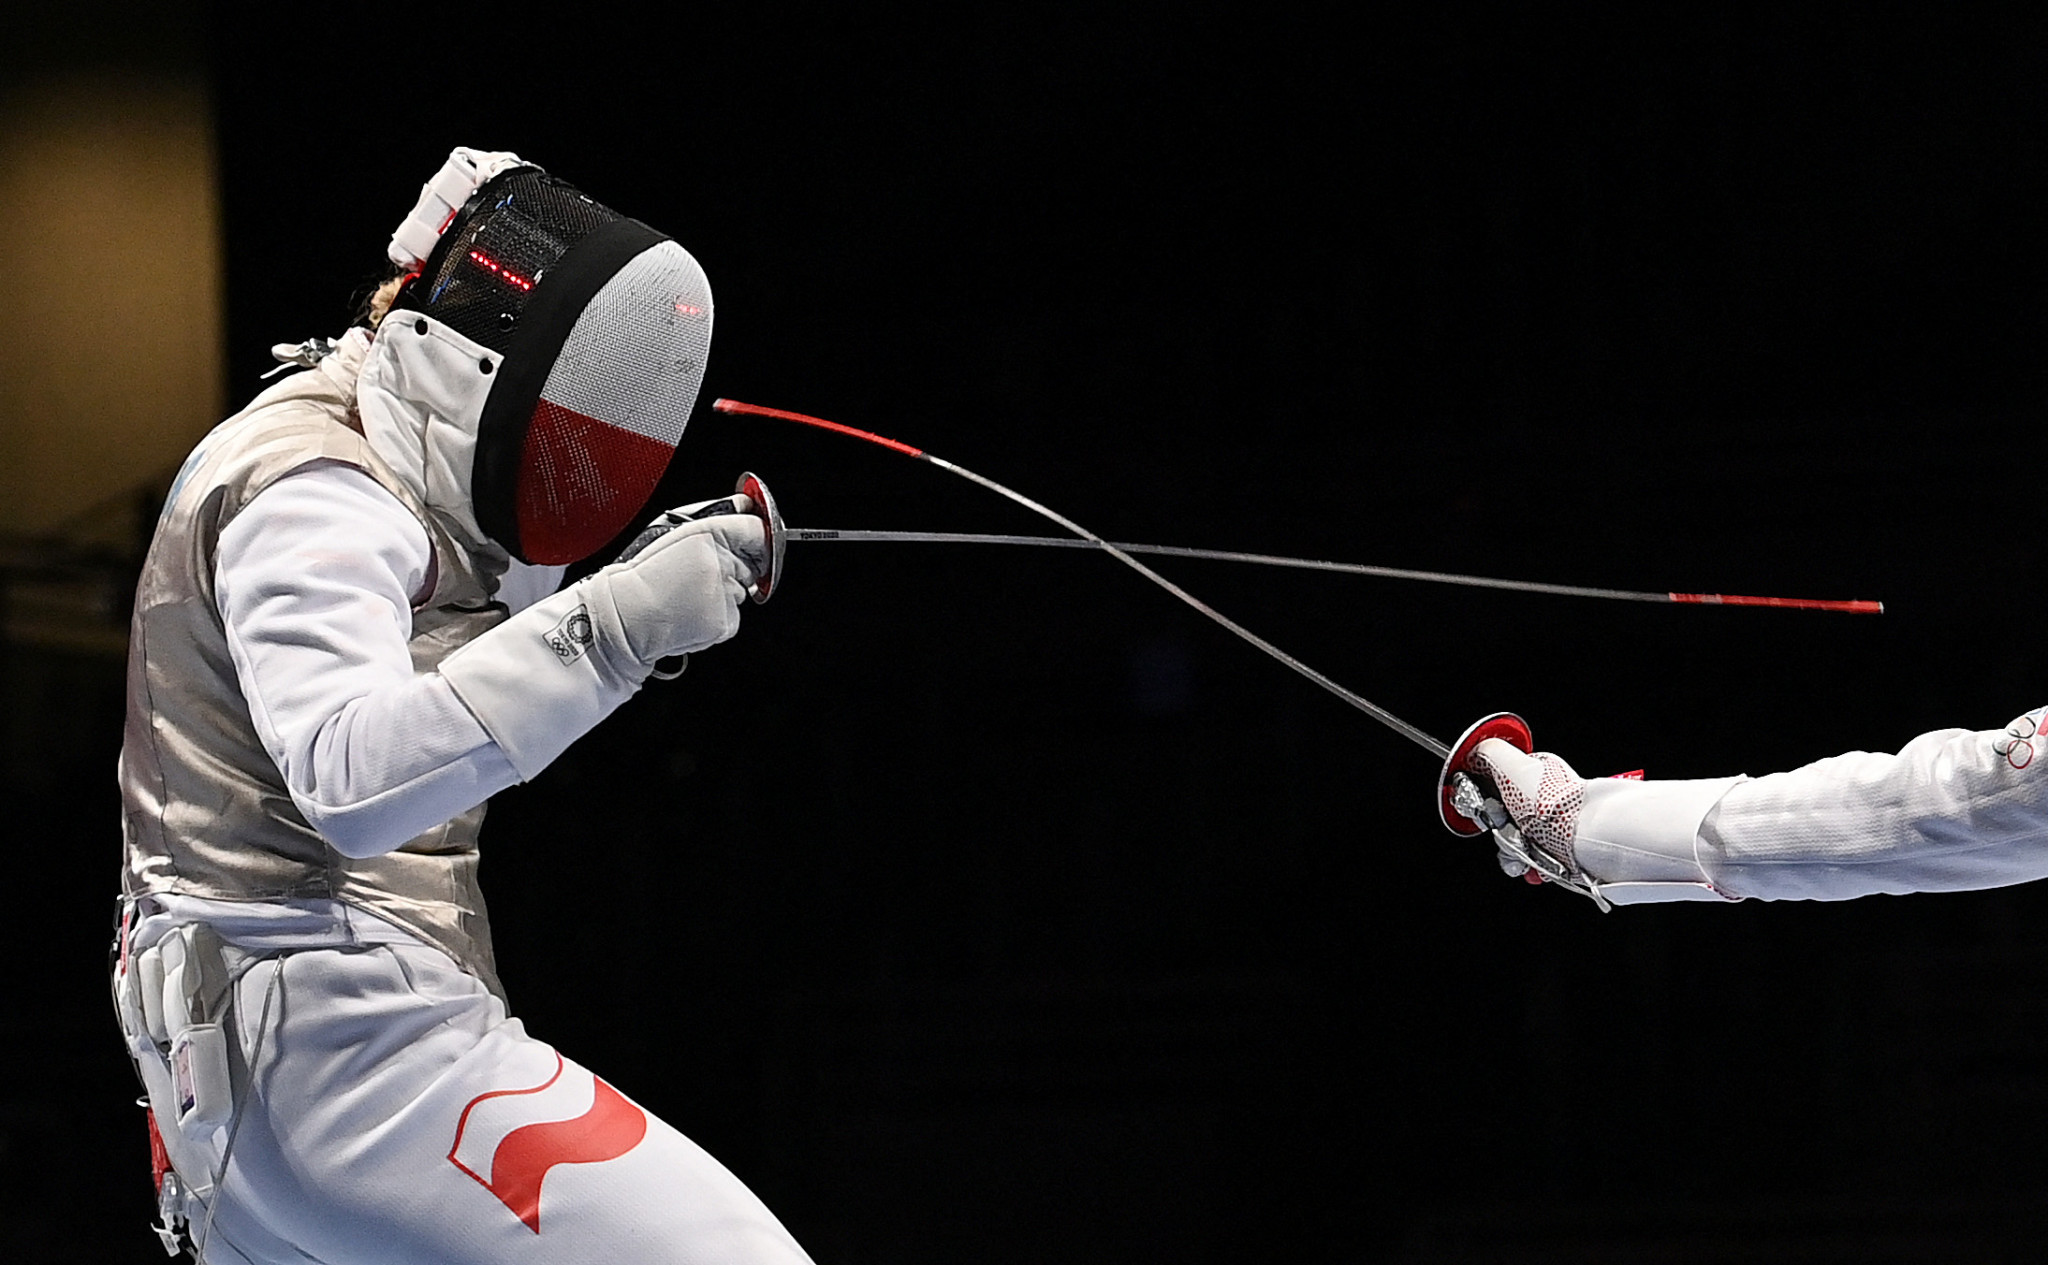 The Polish Fencing Federation has not ruled out cancelling the FIE World Cup in Poznań next month ©Getty Images